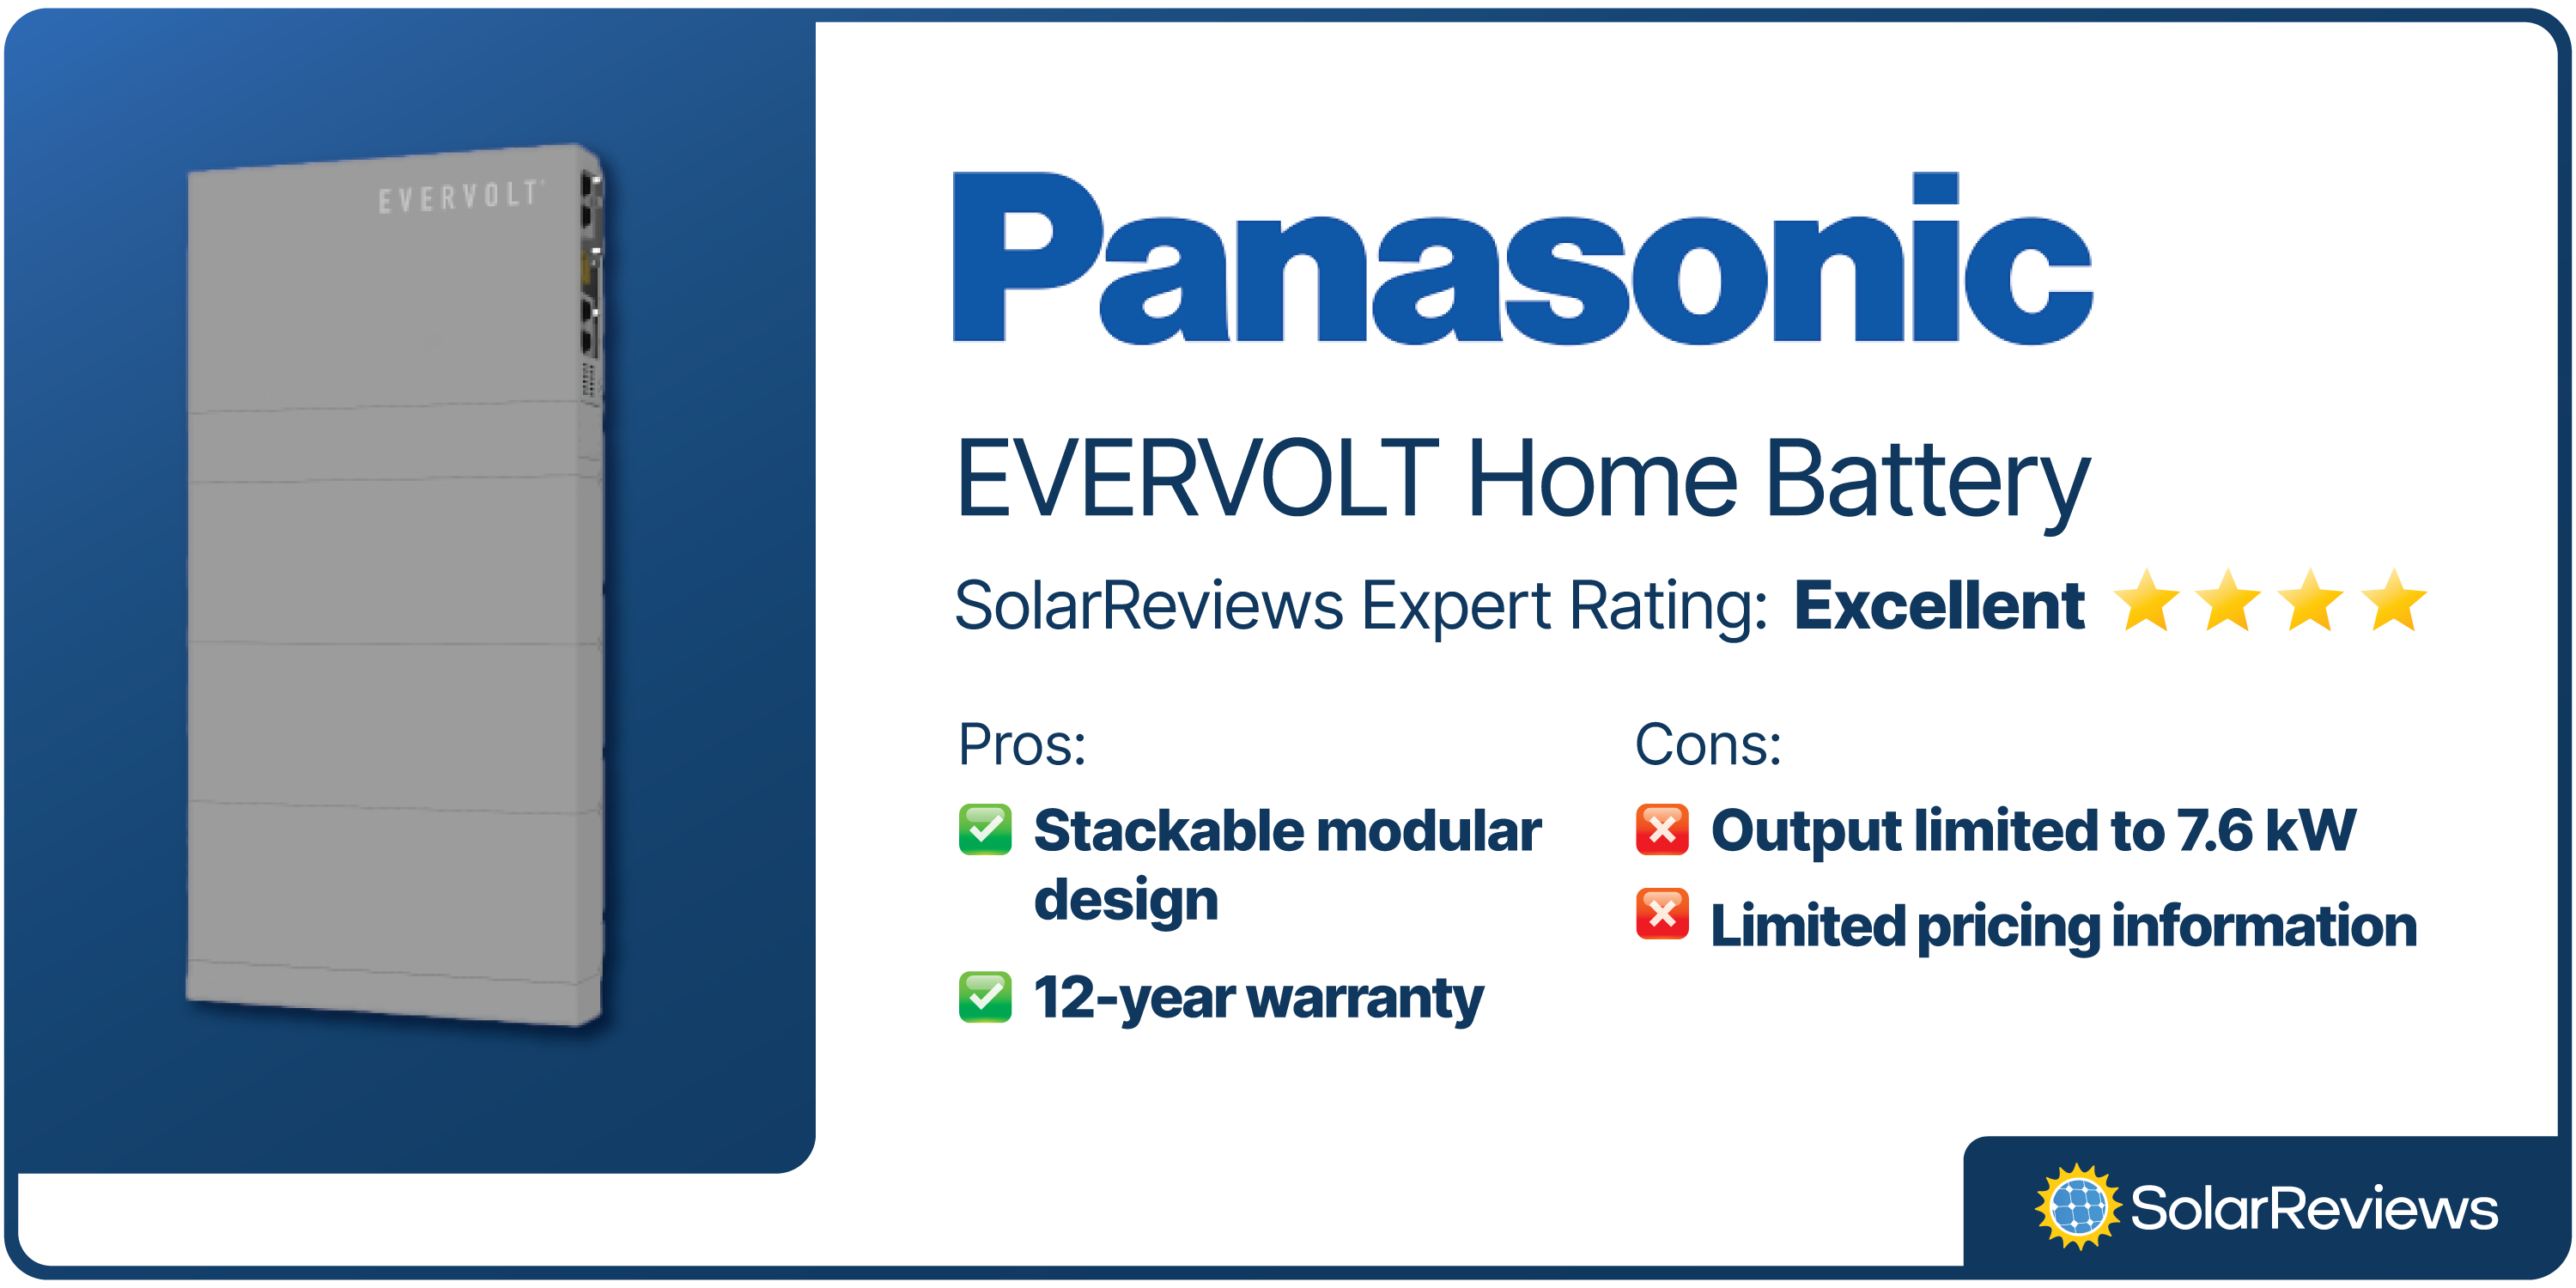 The Panasonic EVERVOLT Home battery received an Excellent rating from SolarReview's experts thanks to its stackable modular design and 12-year warranty. However, it's output is somewhat limited, and there is little pricing information available.